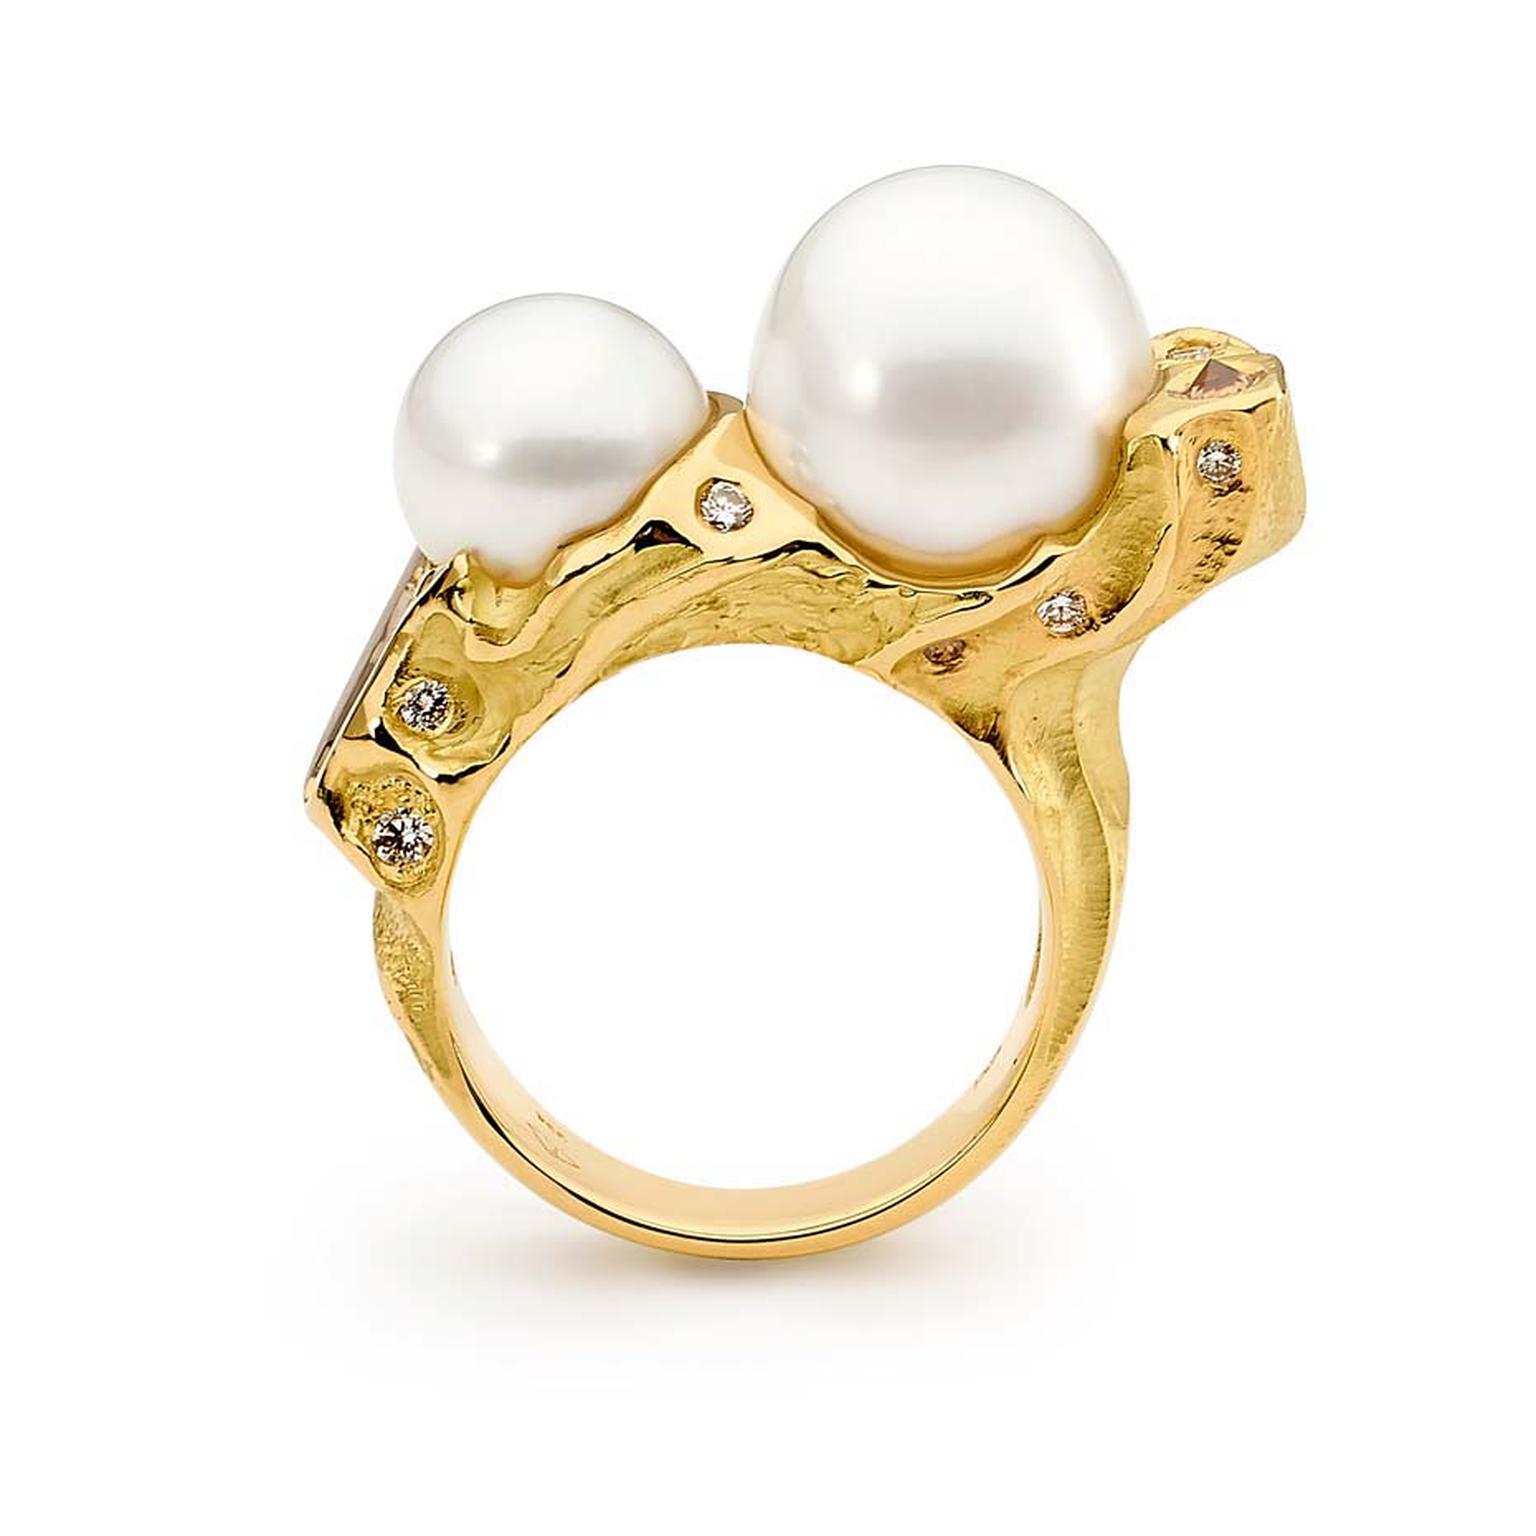 Linneys ring in two-tone gold with two Australian South Sea pearls.